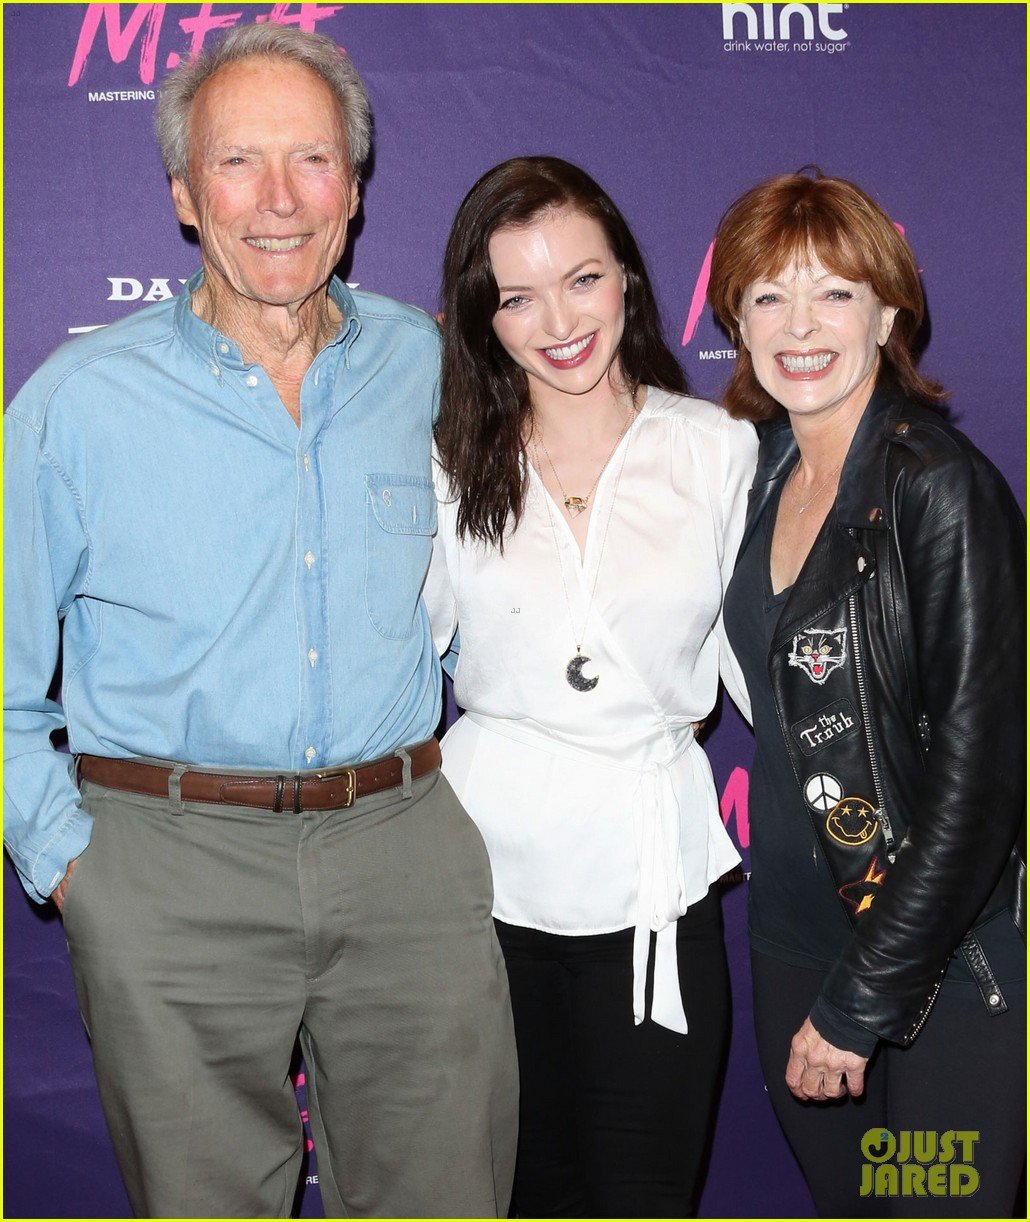 Francesca eastwood of pictures Clint Eastwood's